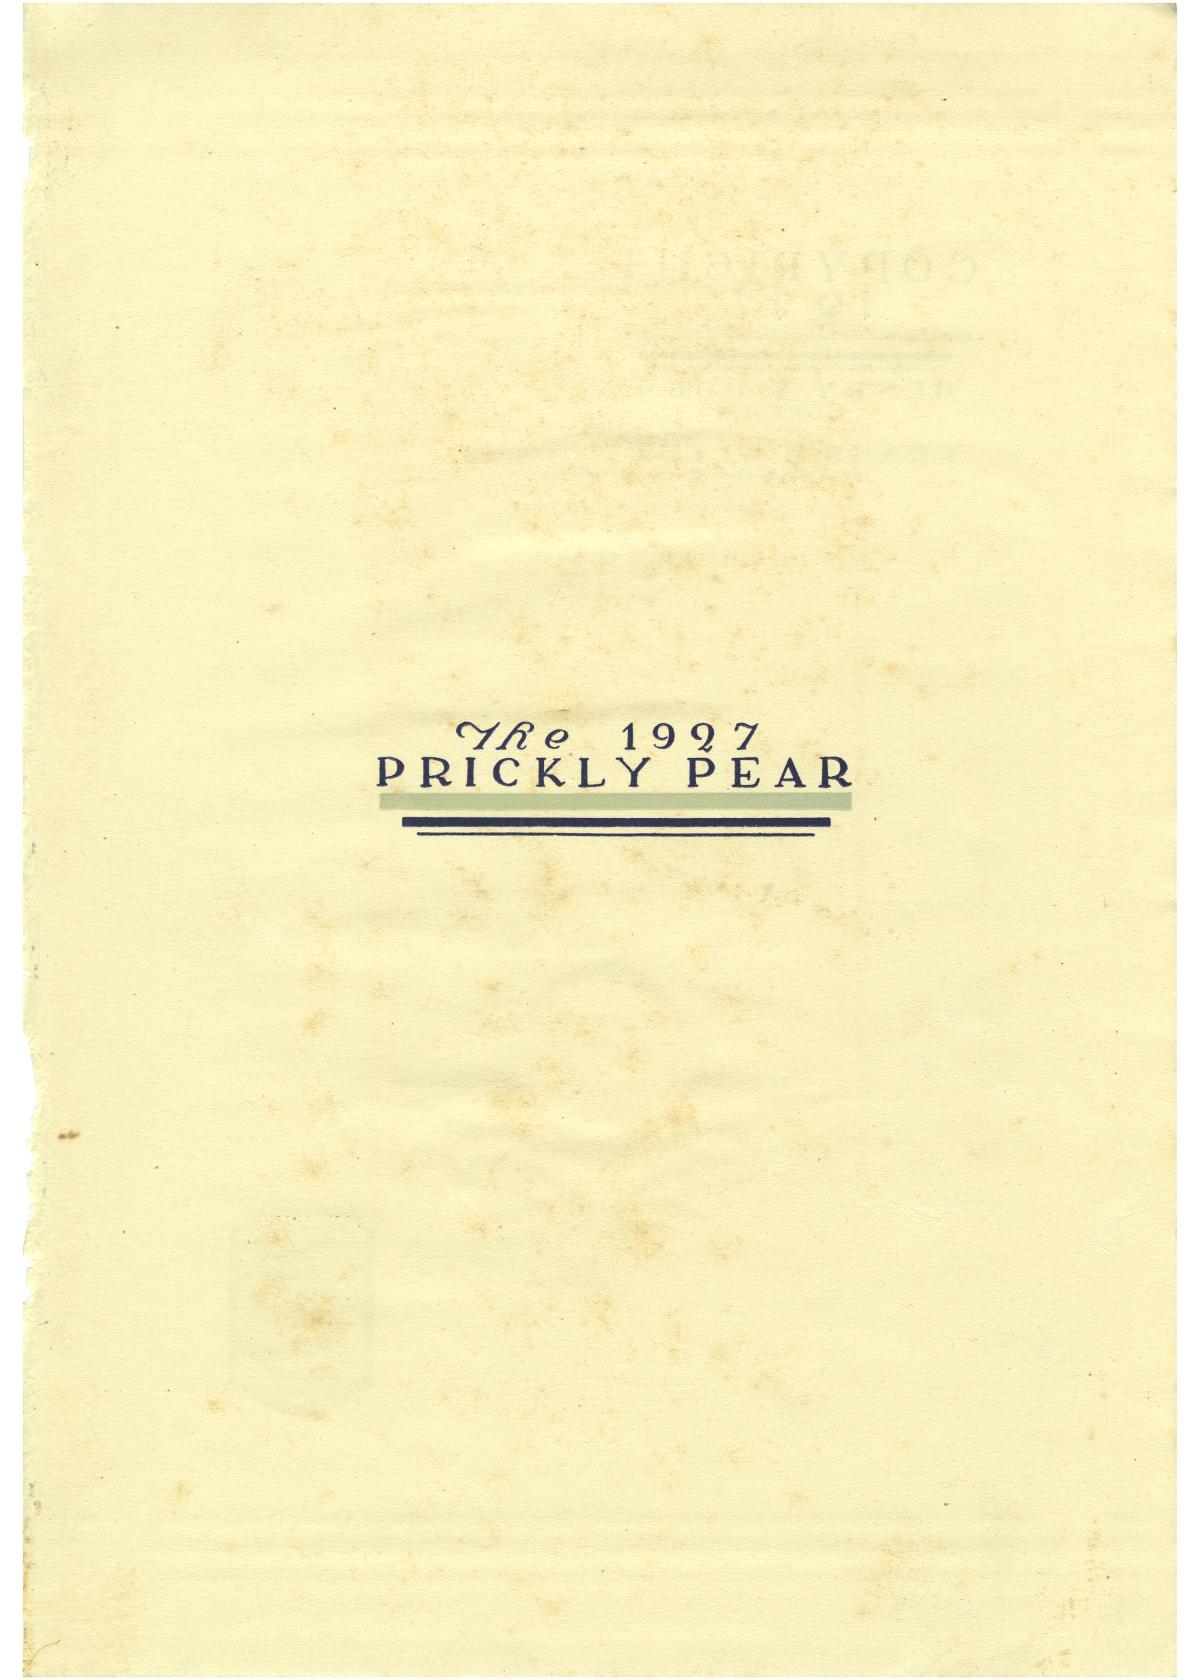 Prickly Pear, Yearbook of Abilene Christian College, 1927
                                                
                                                    1
                                                